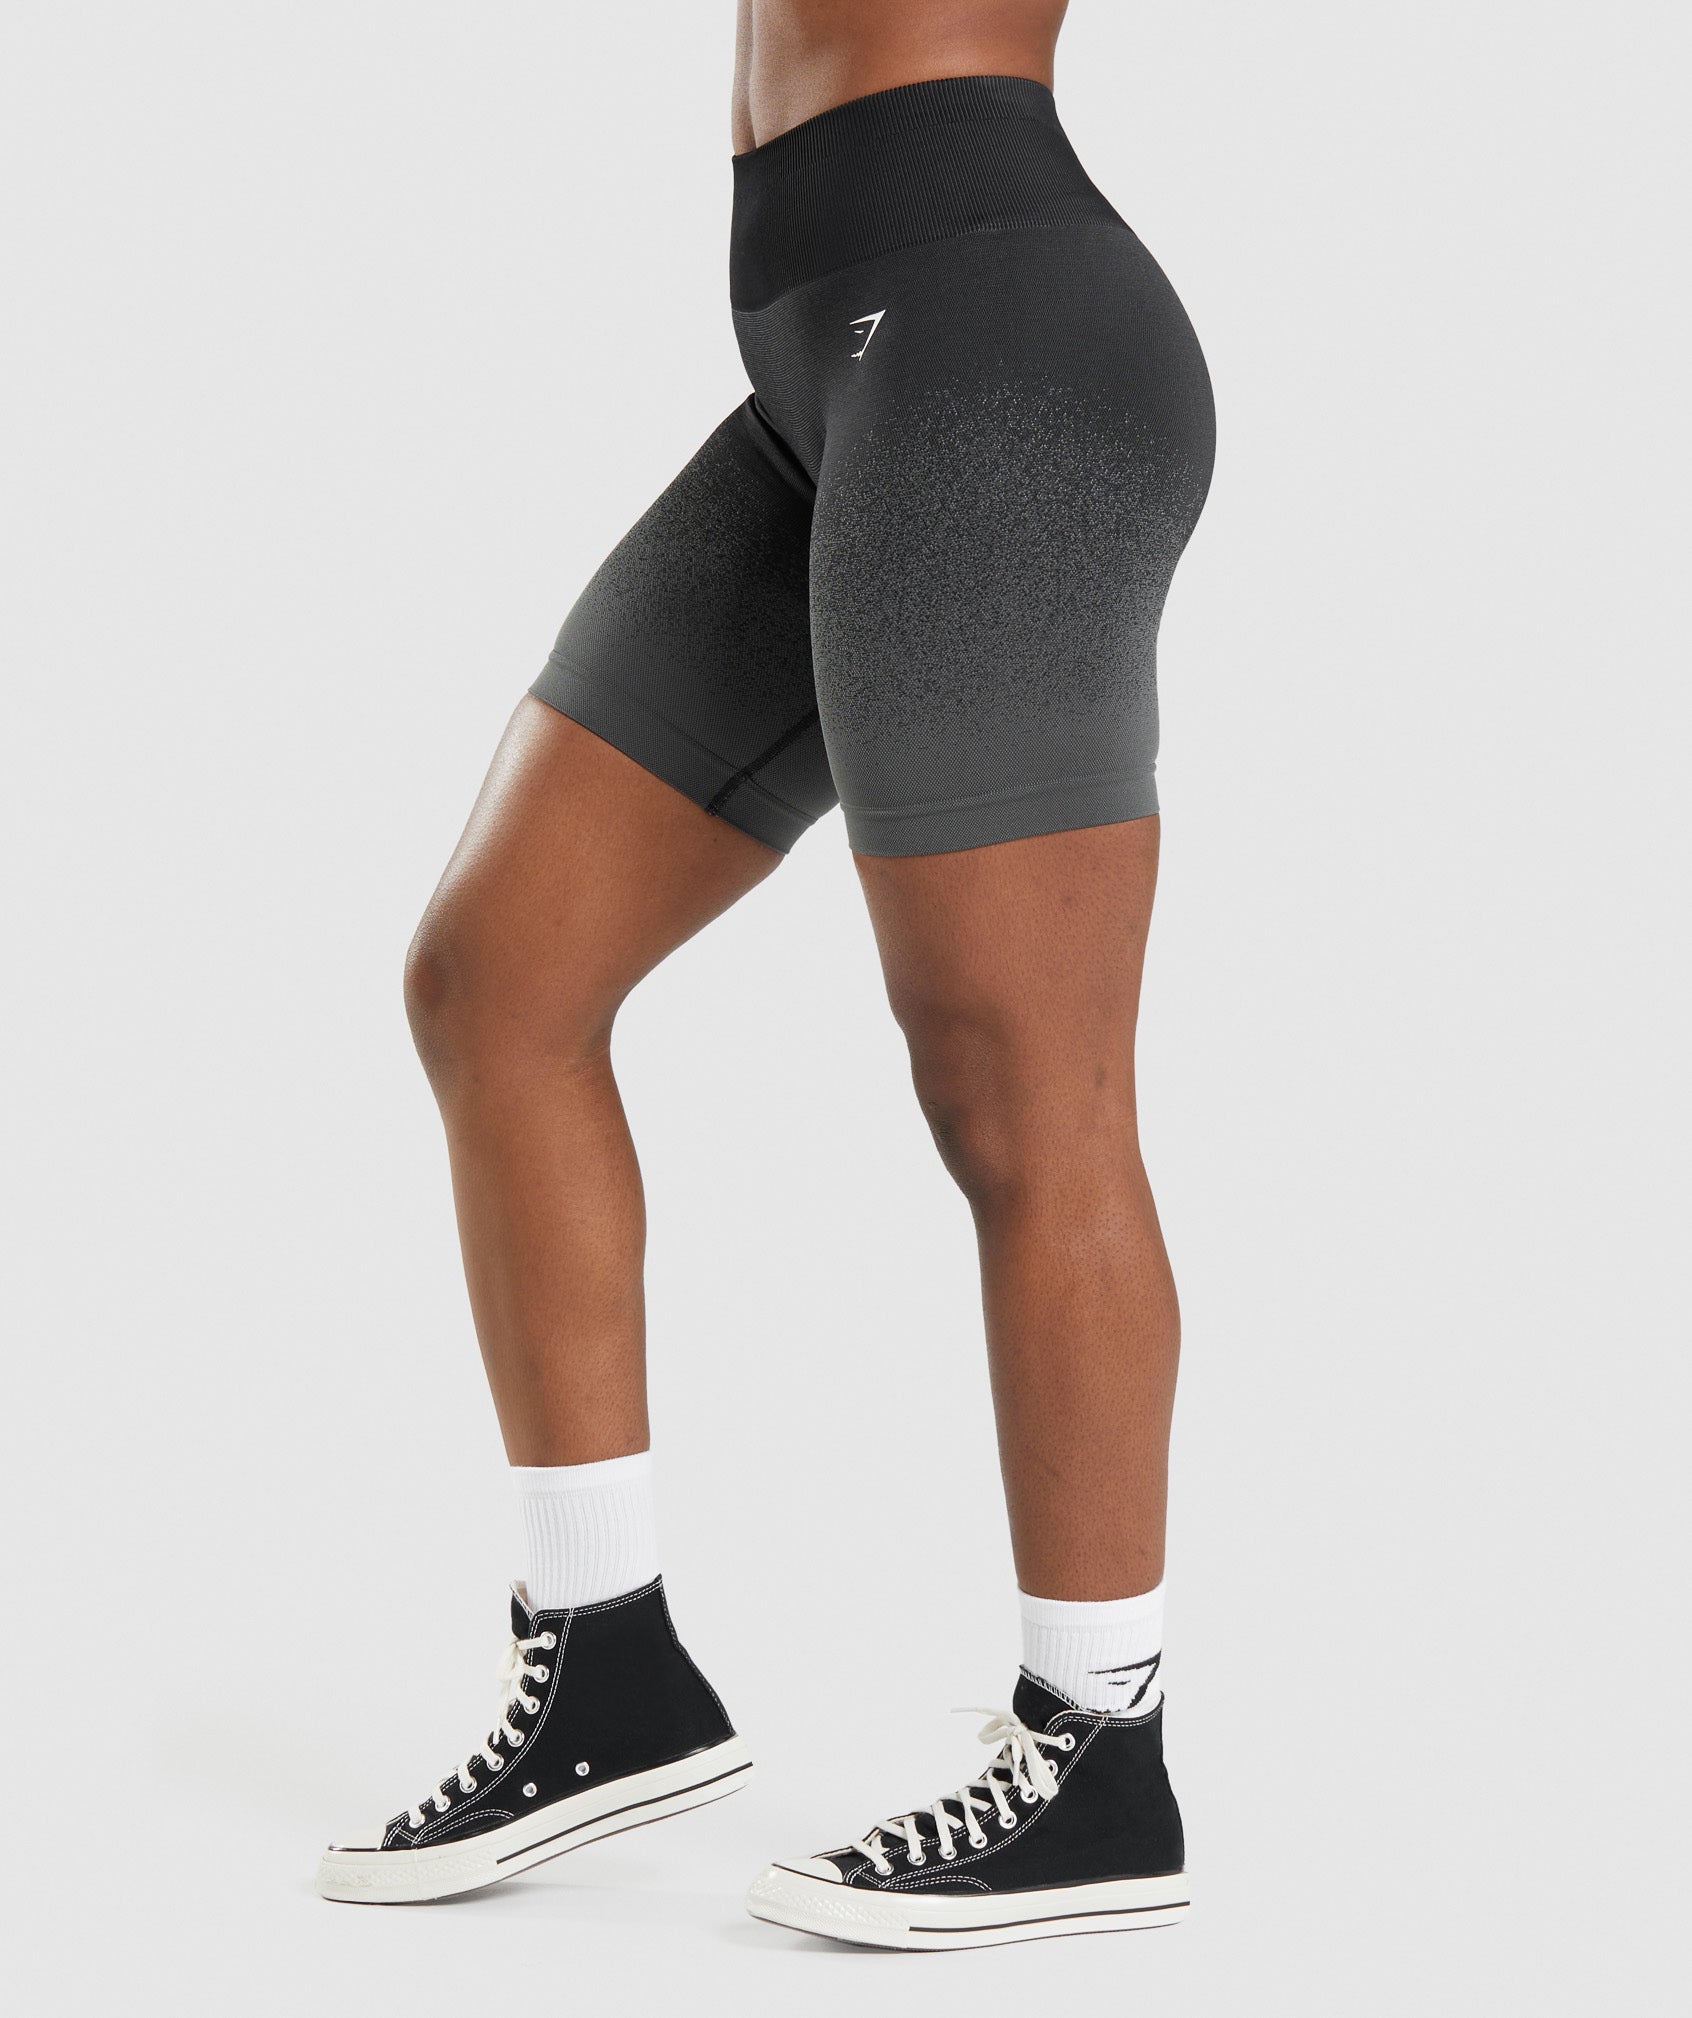 Adapt Ombre Seamless Cycling Shorts in Black/Grey - view 3